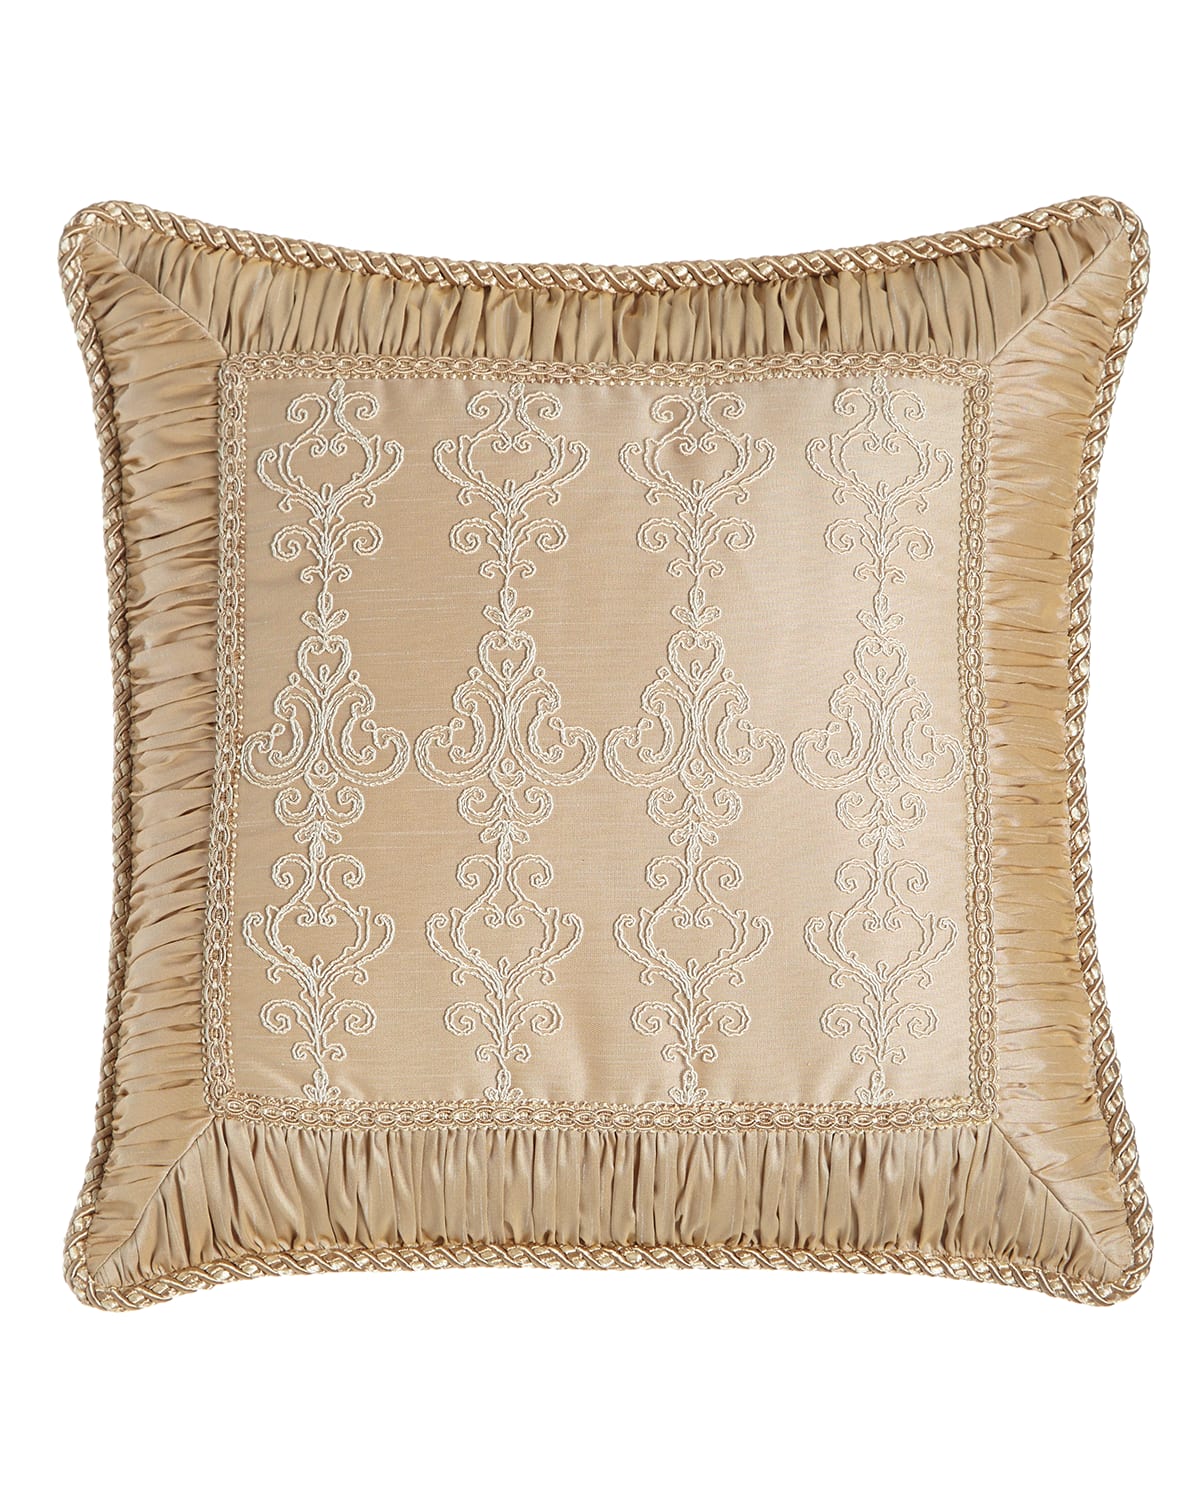 Image Sweet Dreams Elizabeth Lace Pillow with Ruched Border, 19"Sq.